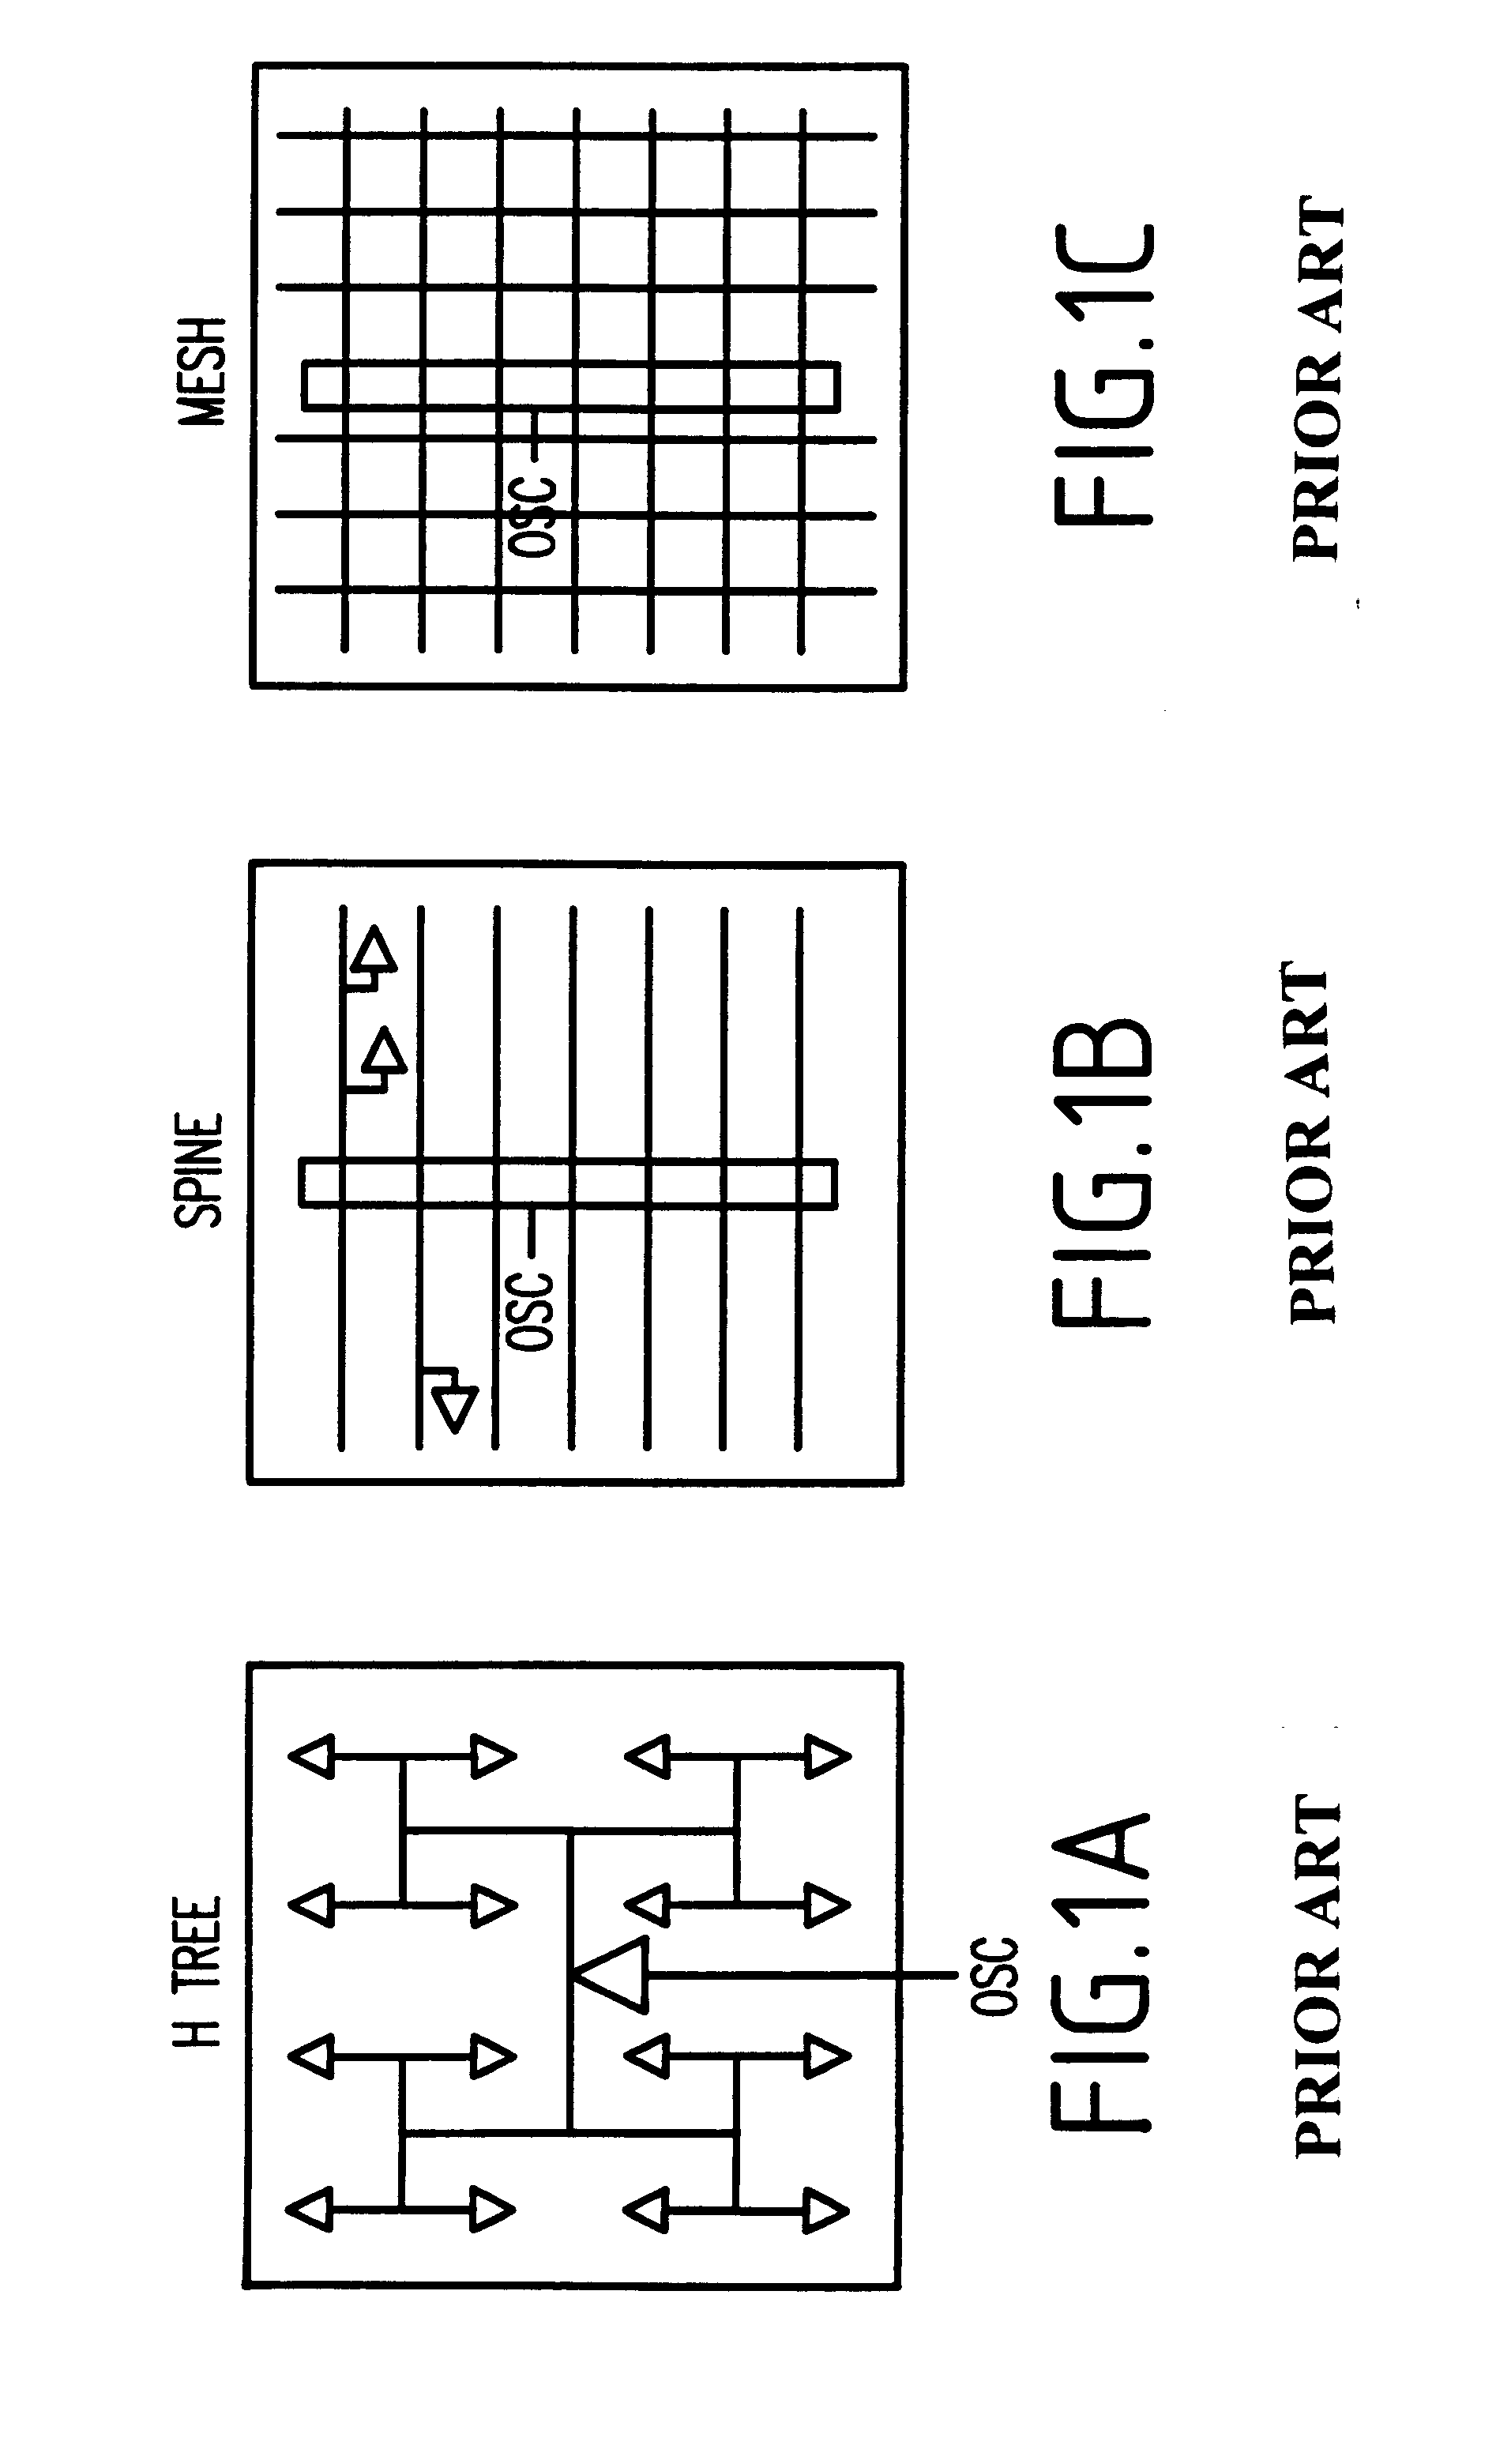 Method and apparatus for routing low-skew clock networks